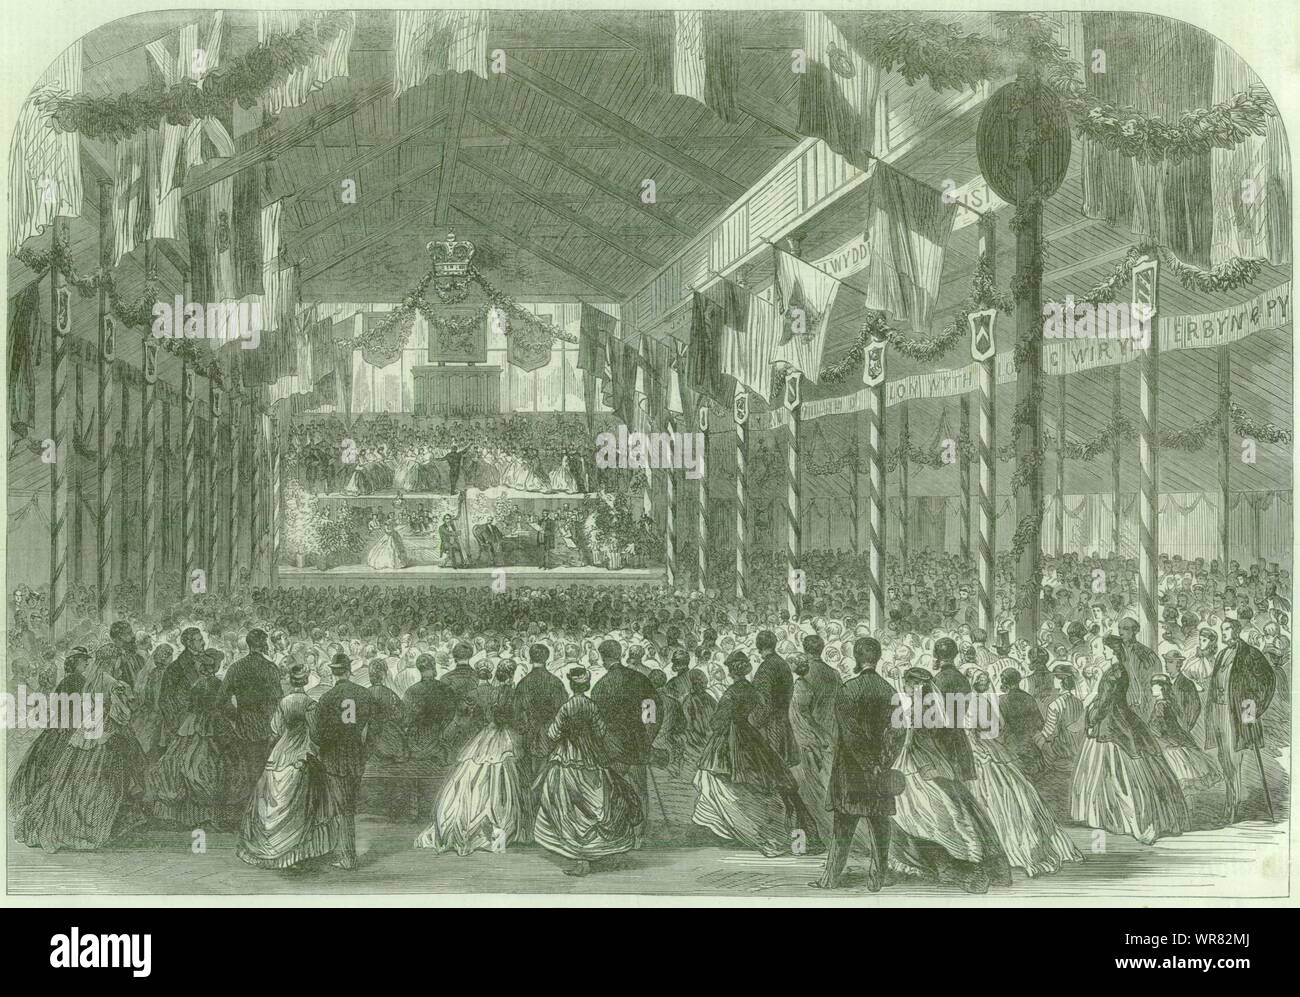 The Eisteddfod, or Welsh National Festival, at Chester. Wales 1866 ILN print Stock Photo